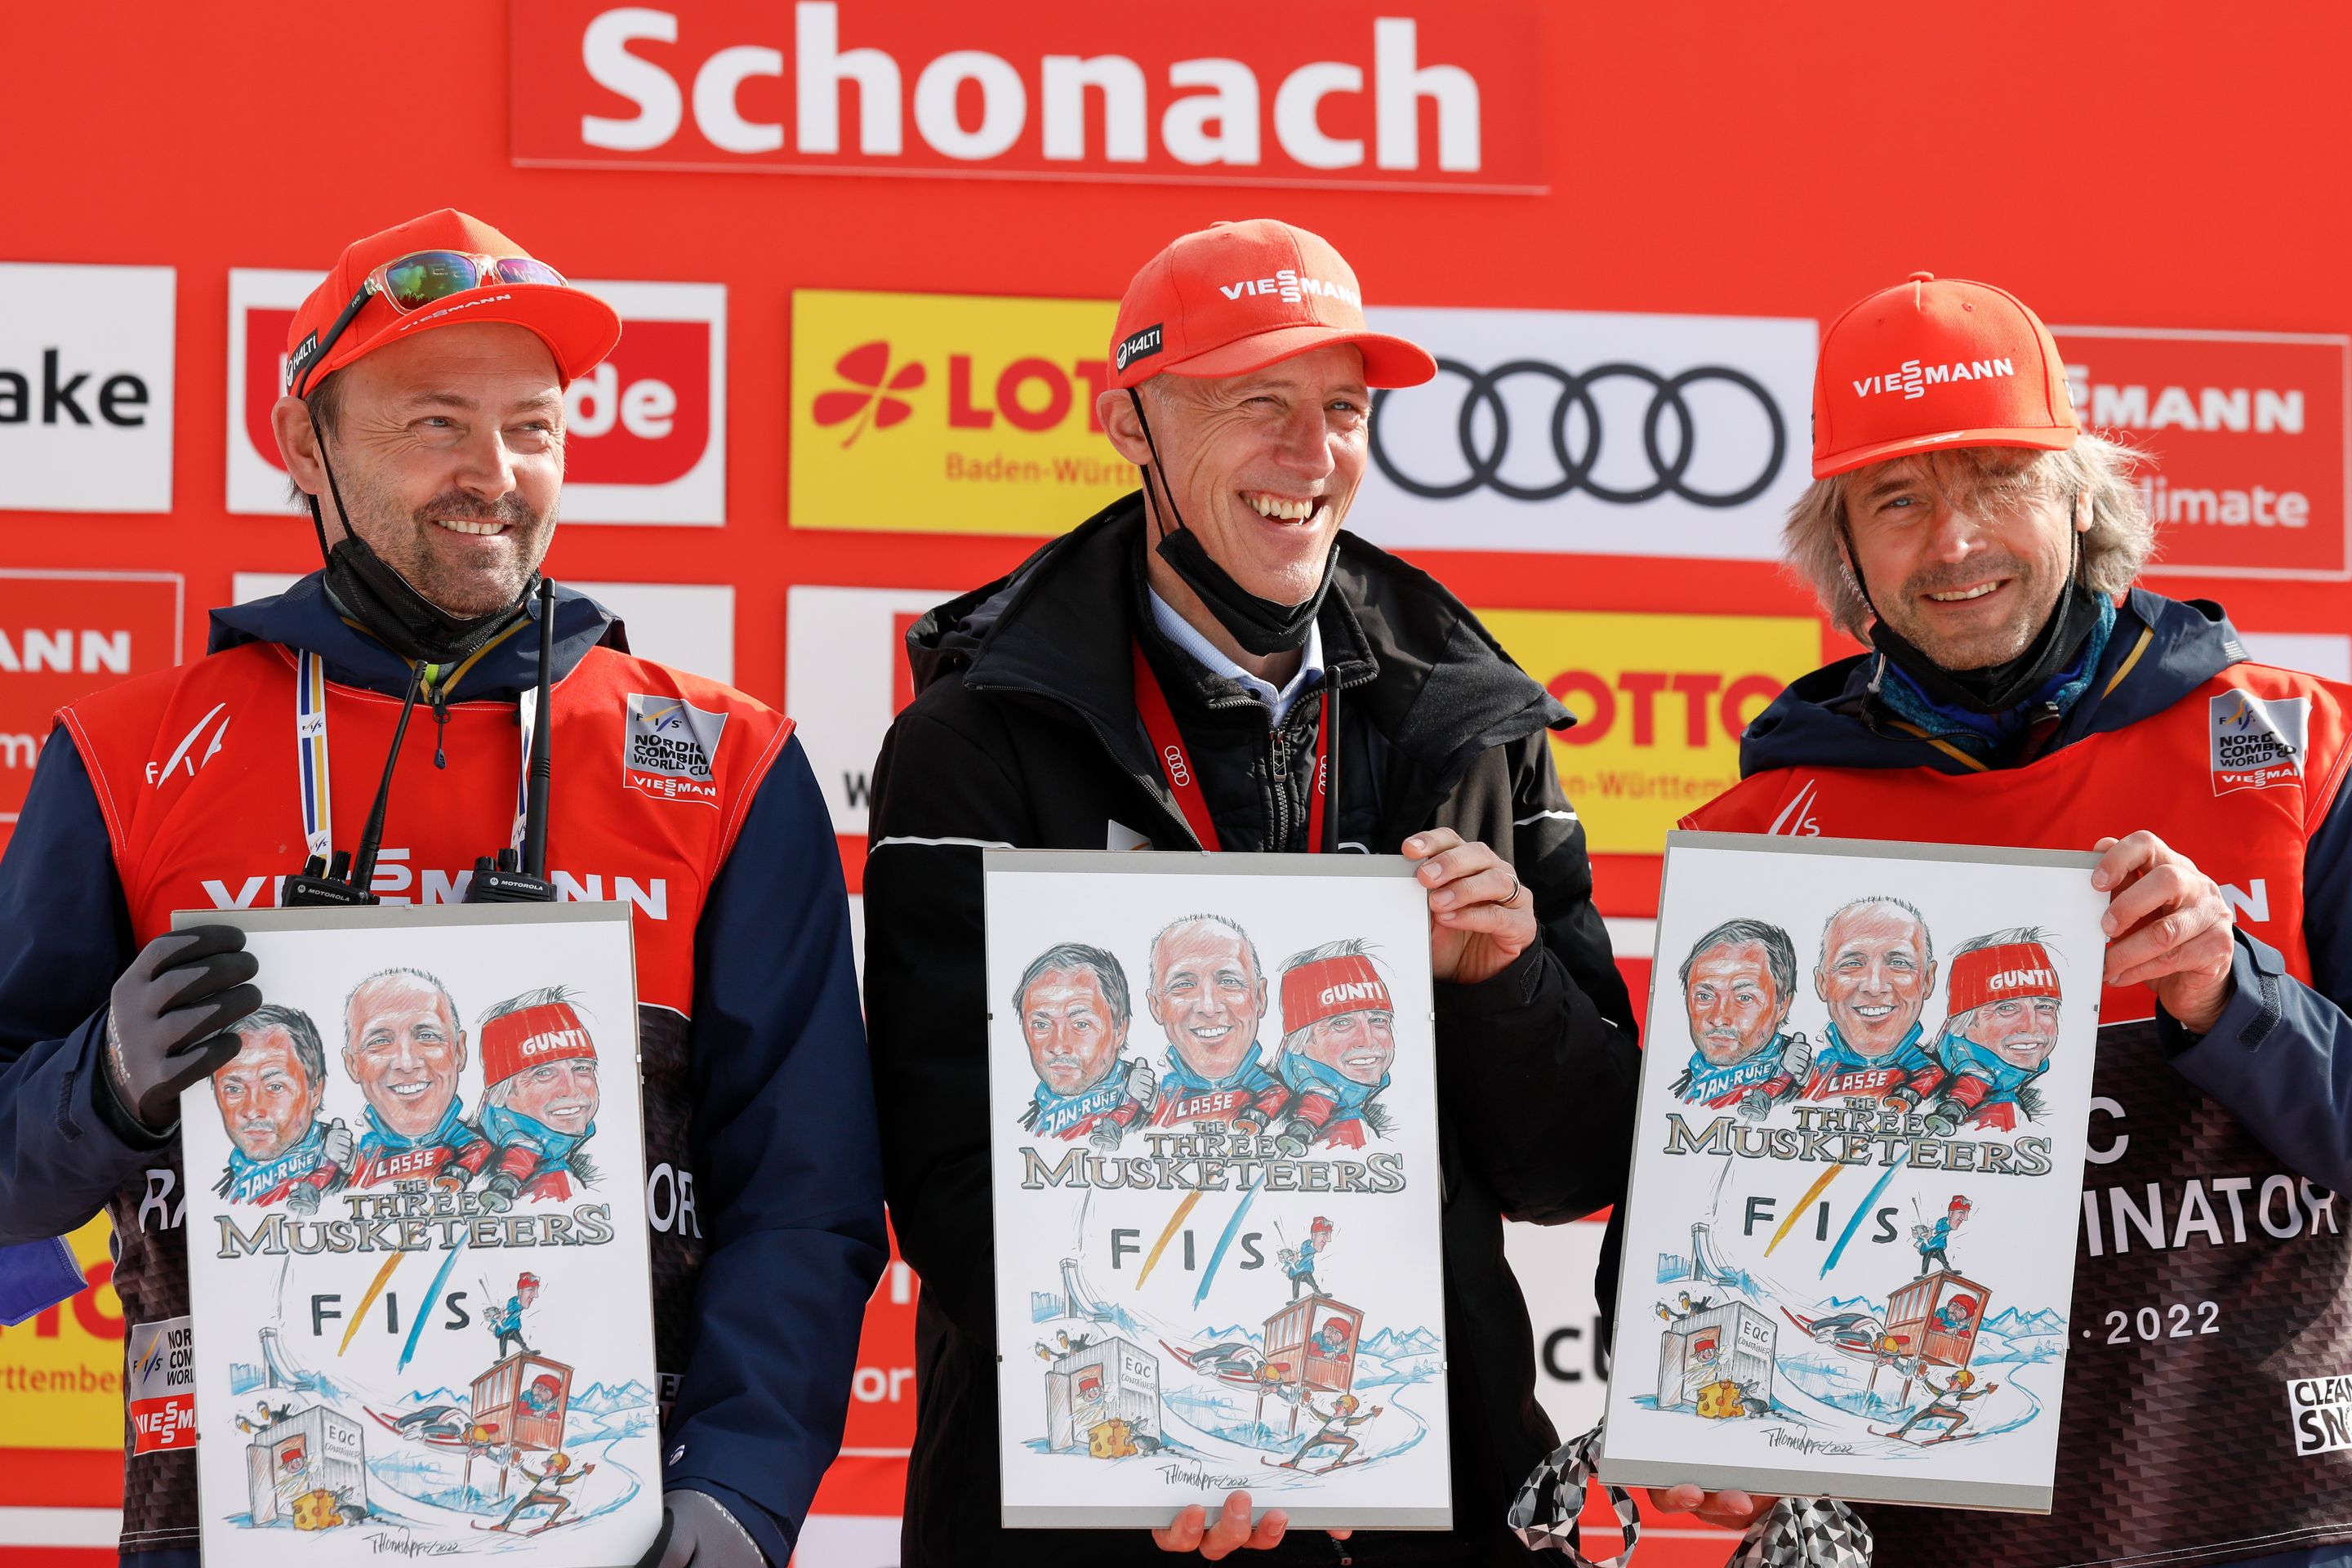 Guntram Kraus (r.) being awarded for 15 years as EQC in Schonach 2022, together with Race Director Lasse Ottesen (m.) and Race Director Assistant Jan Rune Grave (l.) (c) Nordic Focus